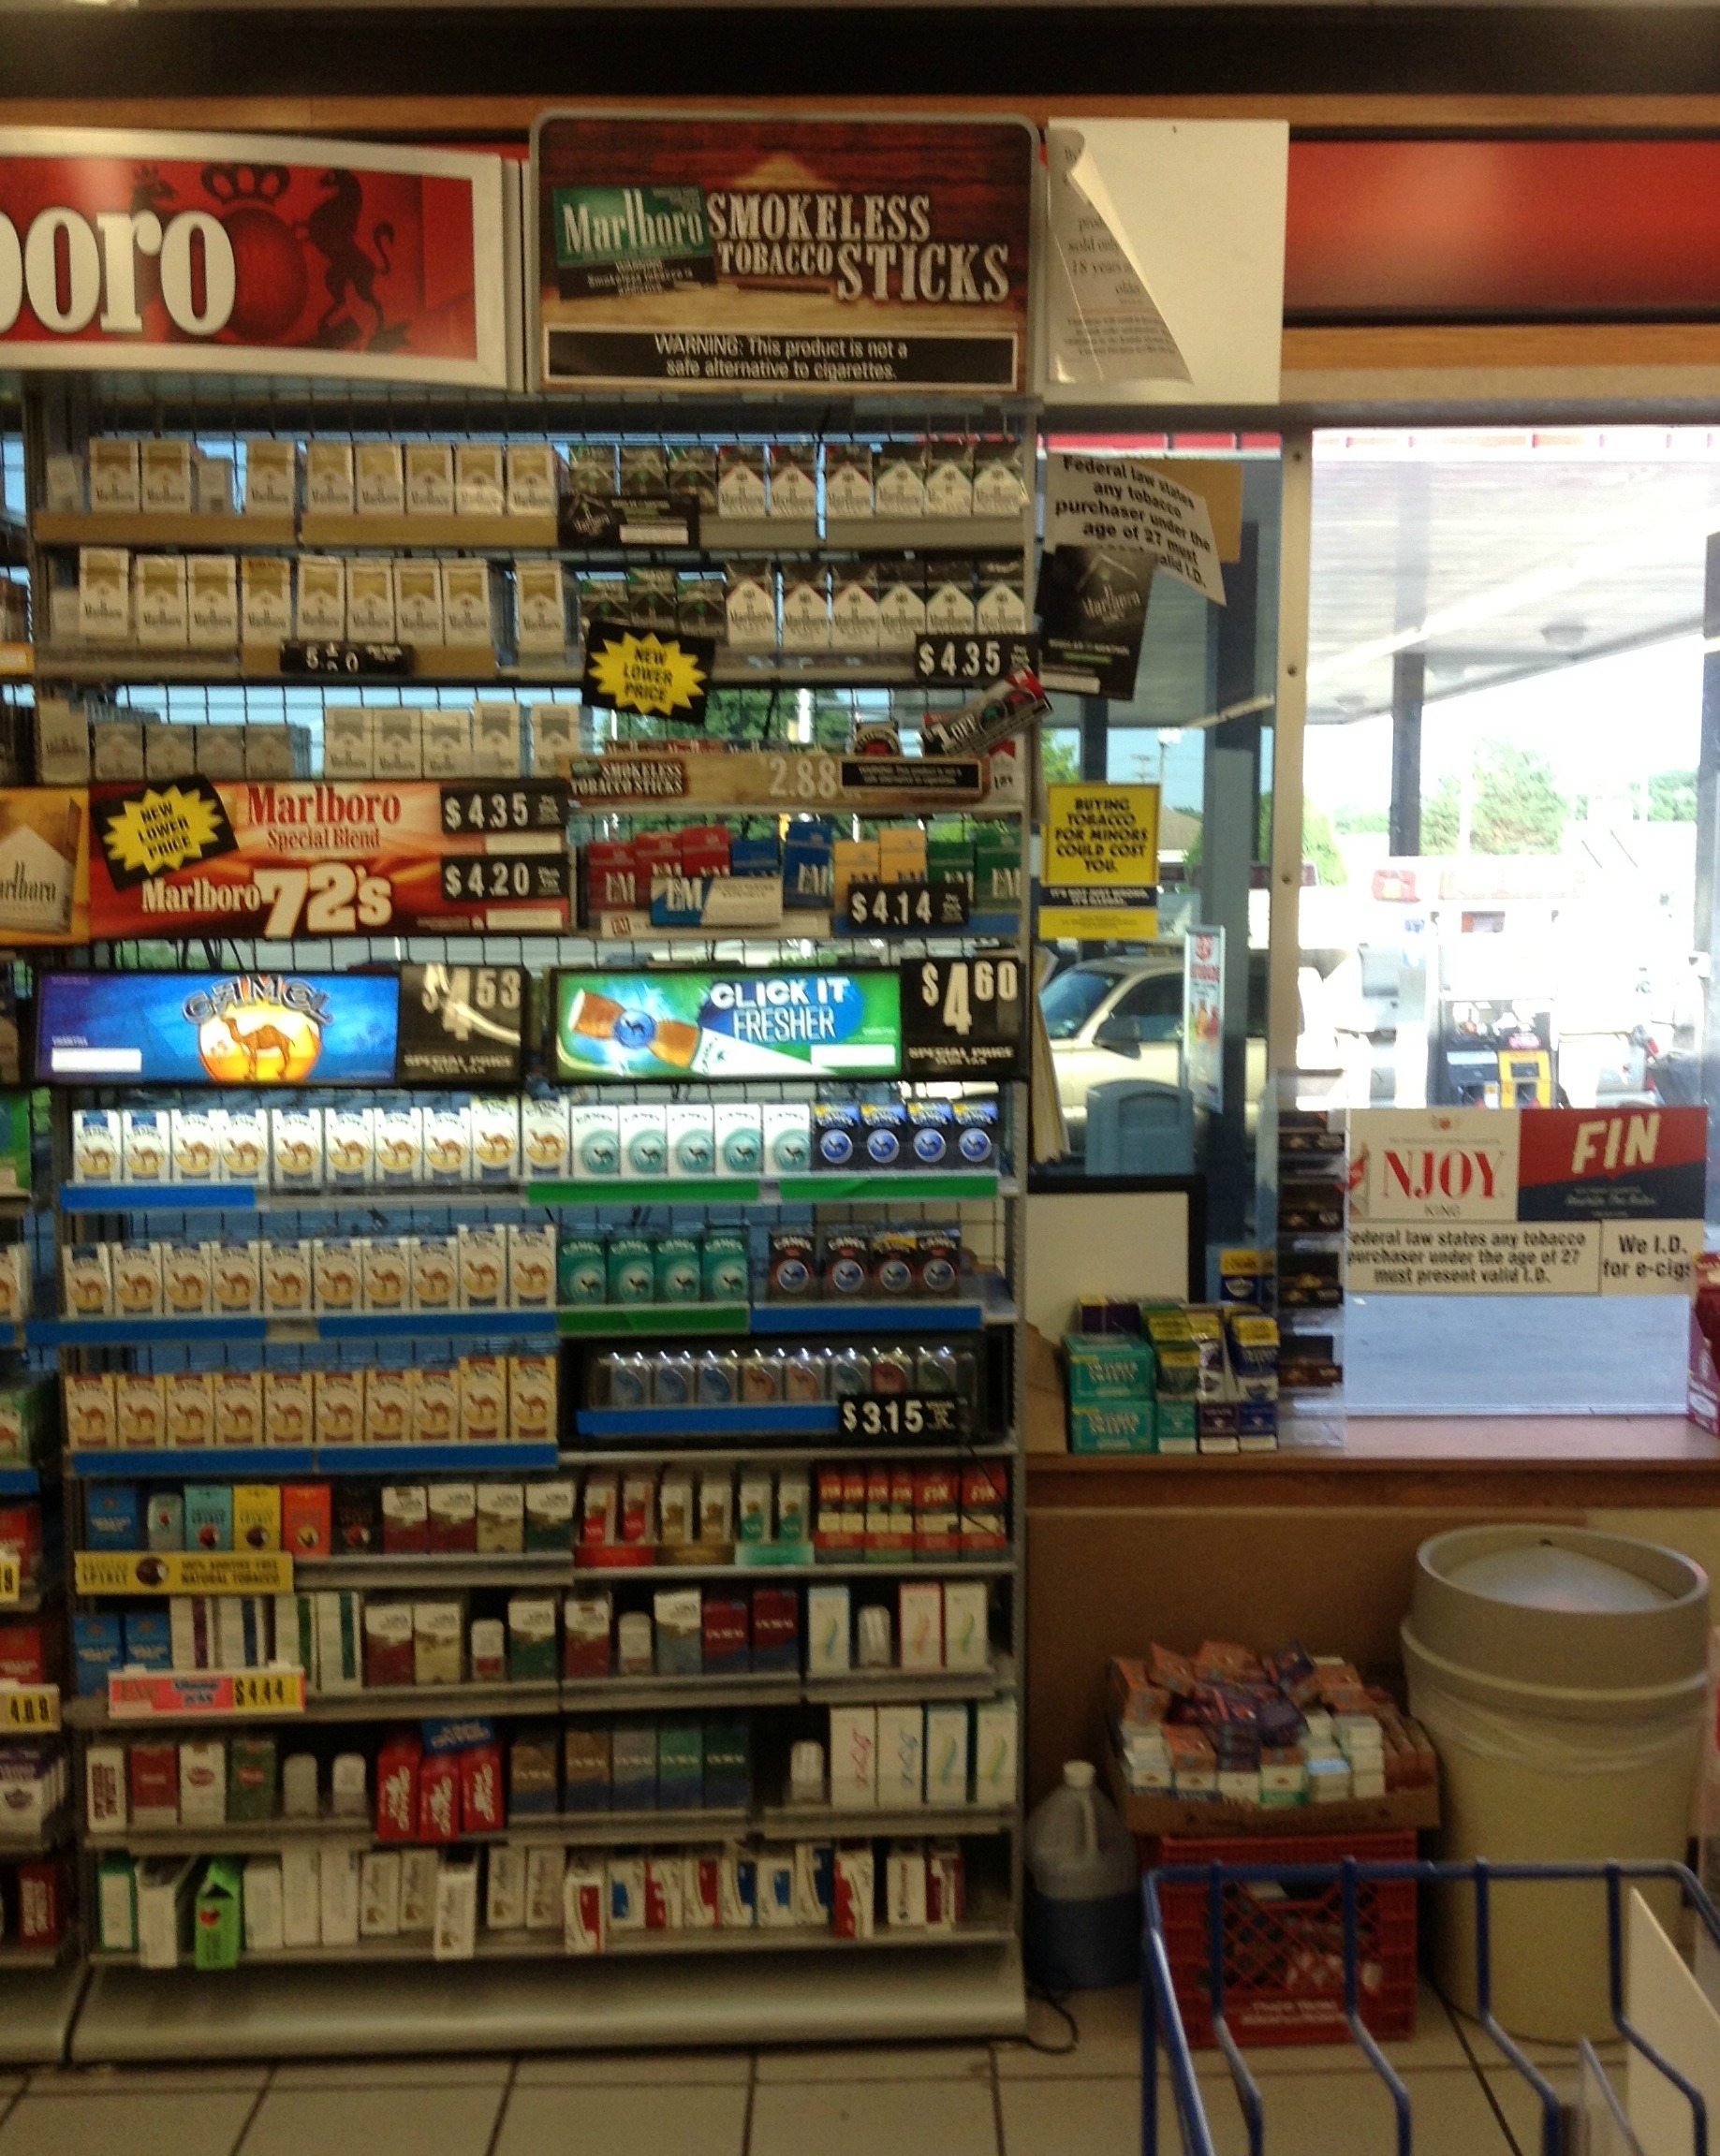 Example of a retail tobacco display